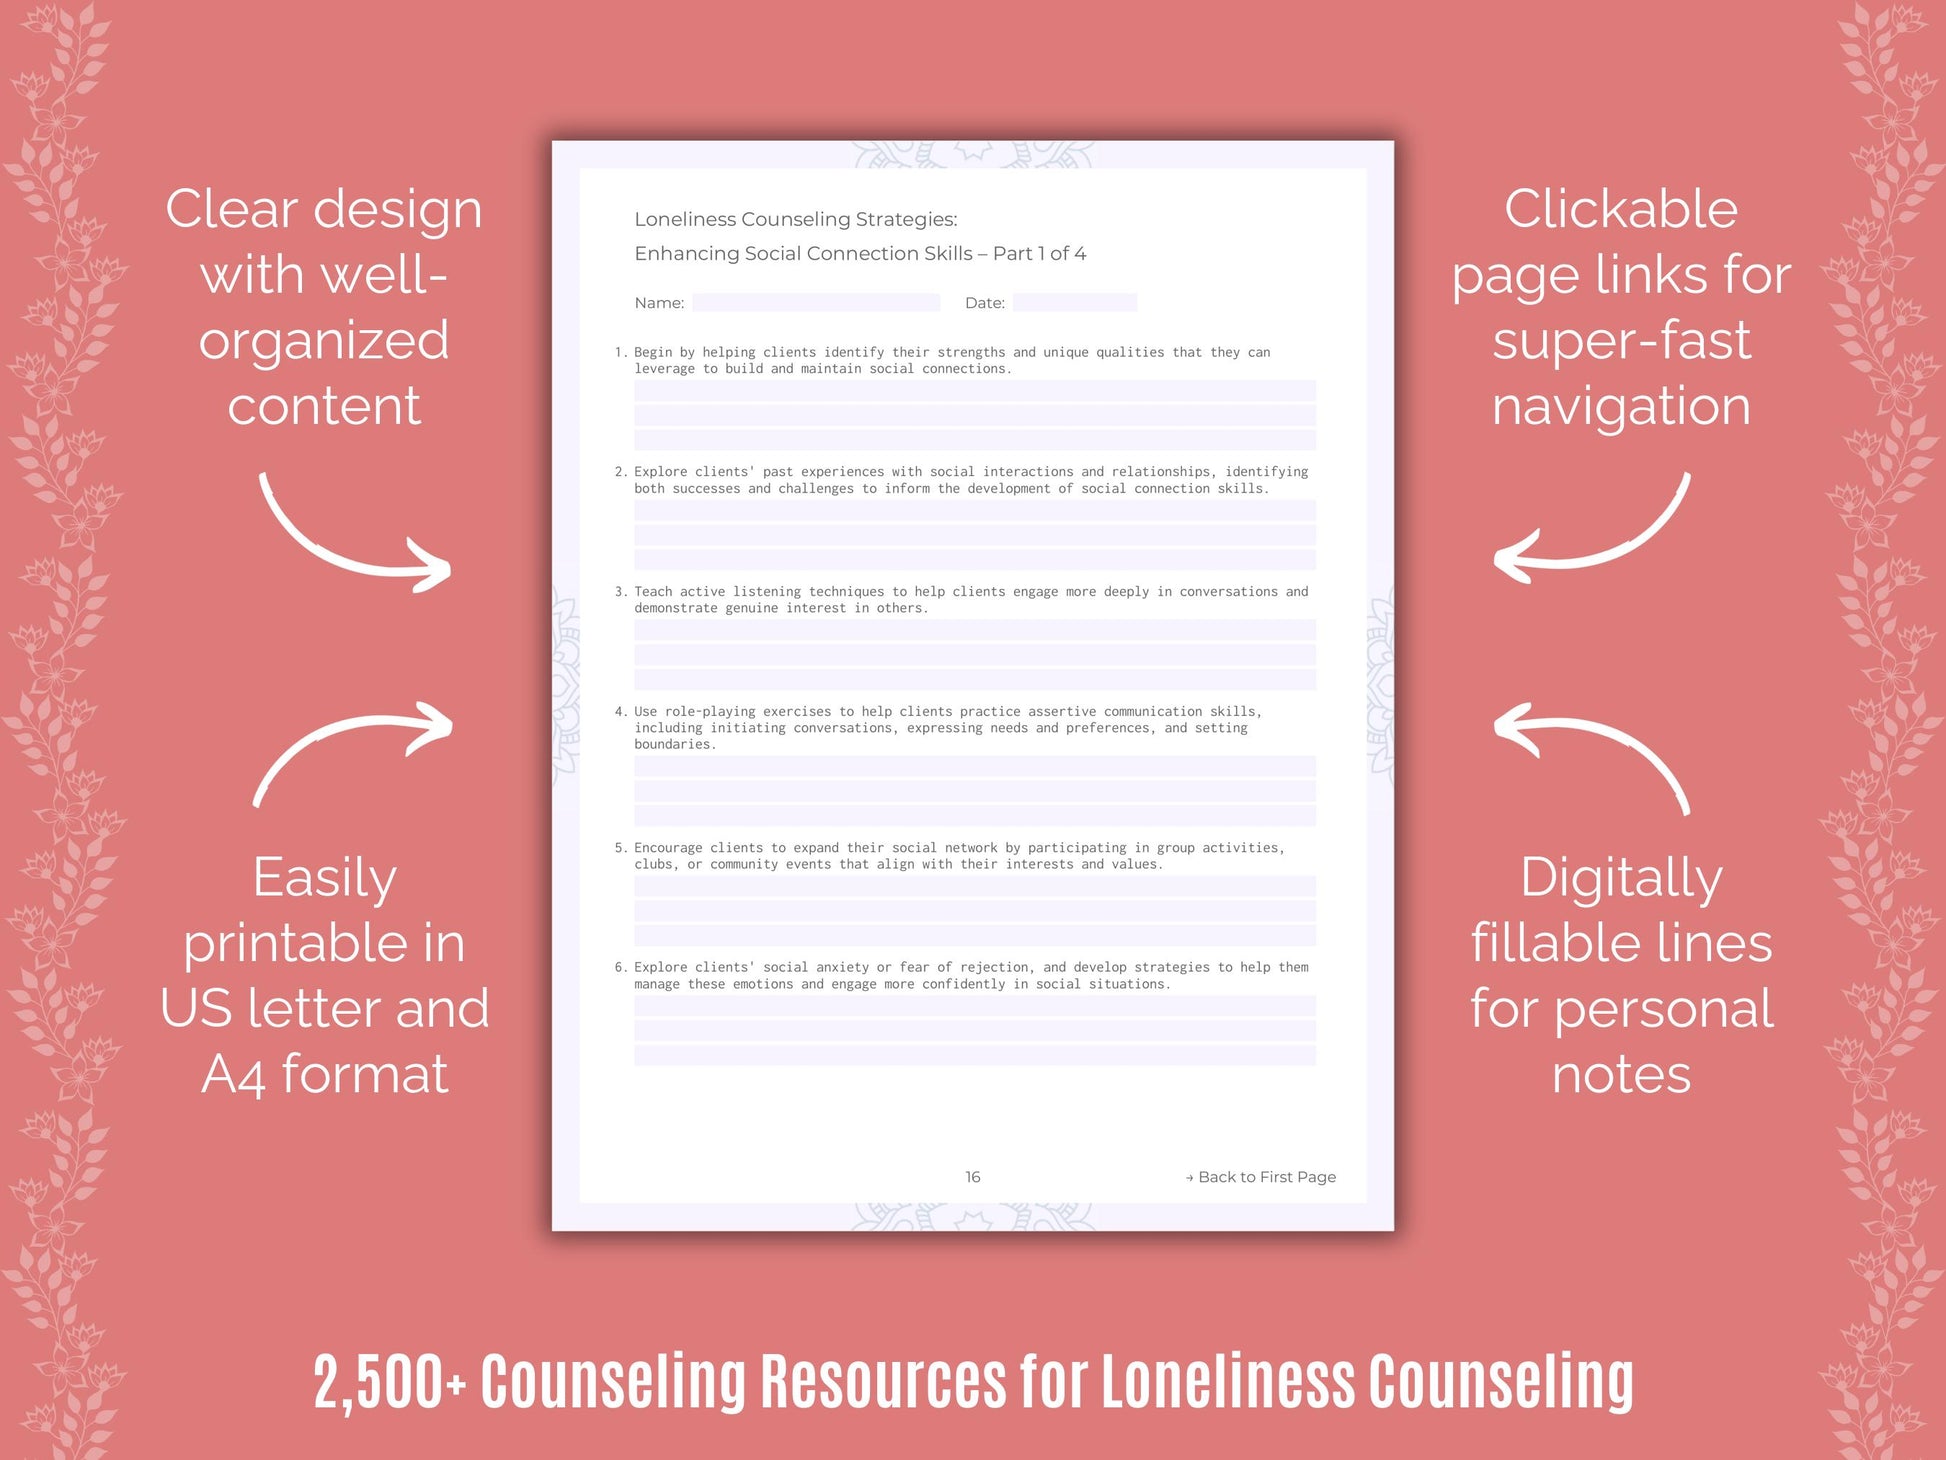 Loneliness, Loneliness Template, Loneliness Workbook, Counseling, Loneliness Idea, Loneliness Resource, Mental Health, Loneliness Therapy, Loneliness Worksheet, Loneliness Tool, Counselor, Therapist, Loneliness Bundle